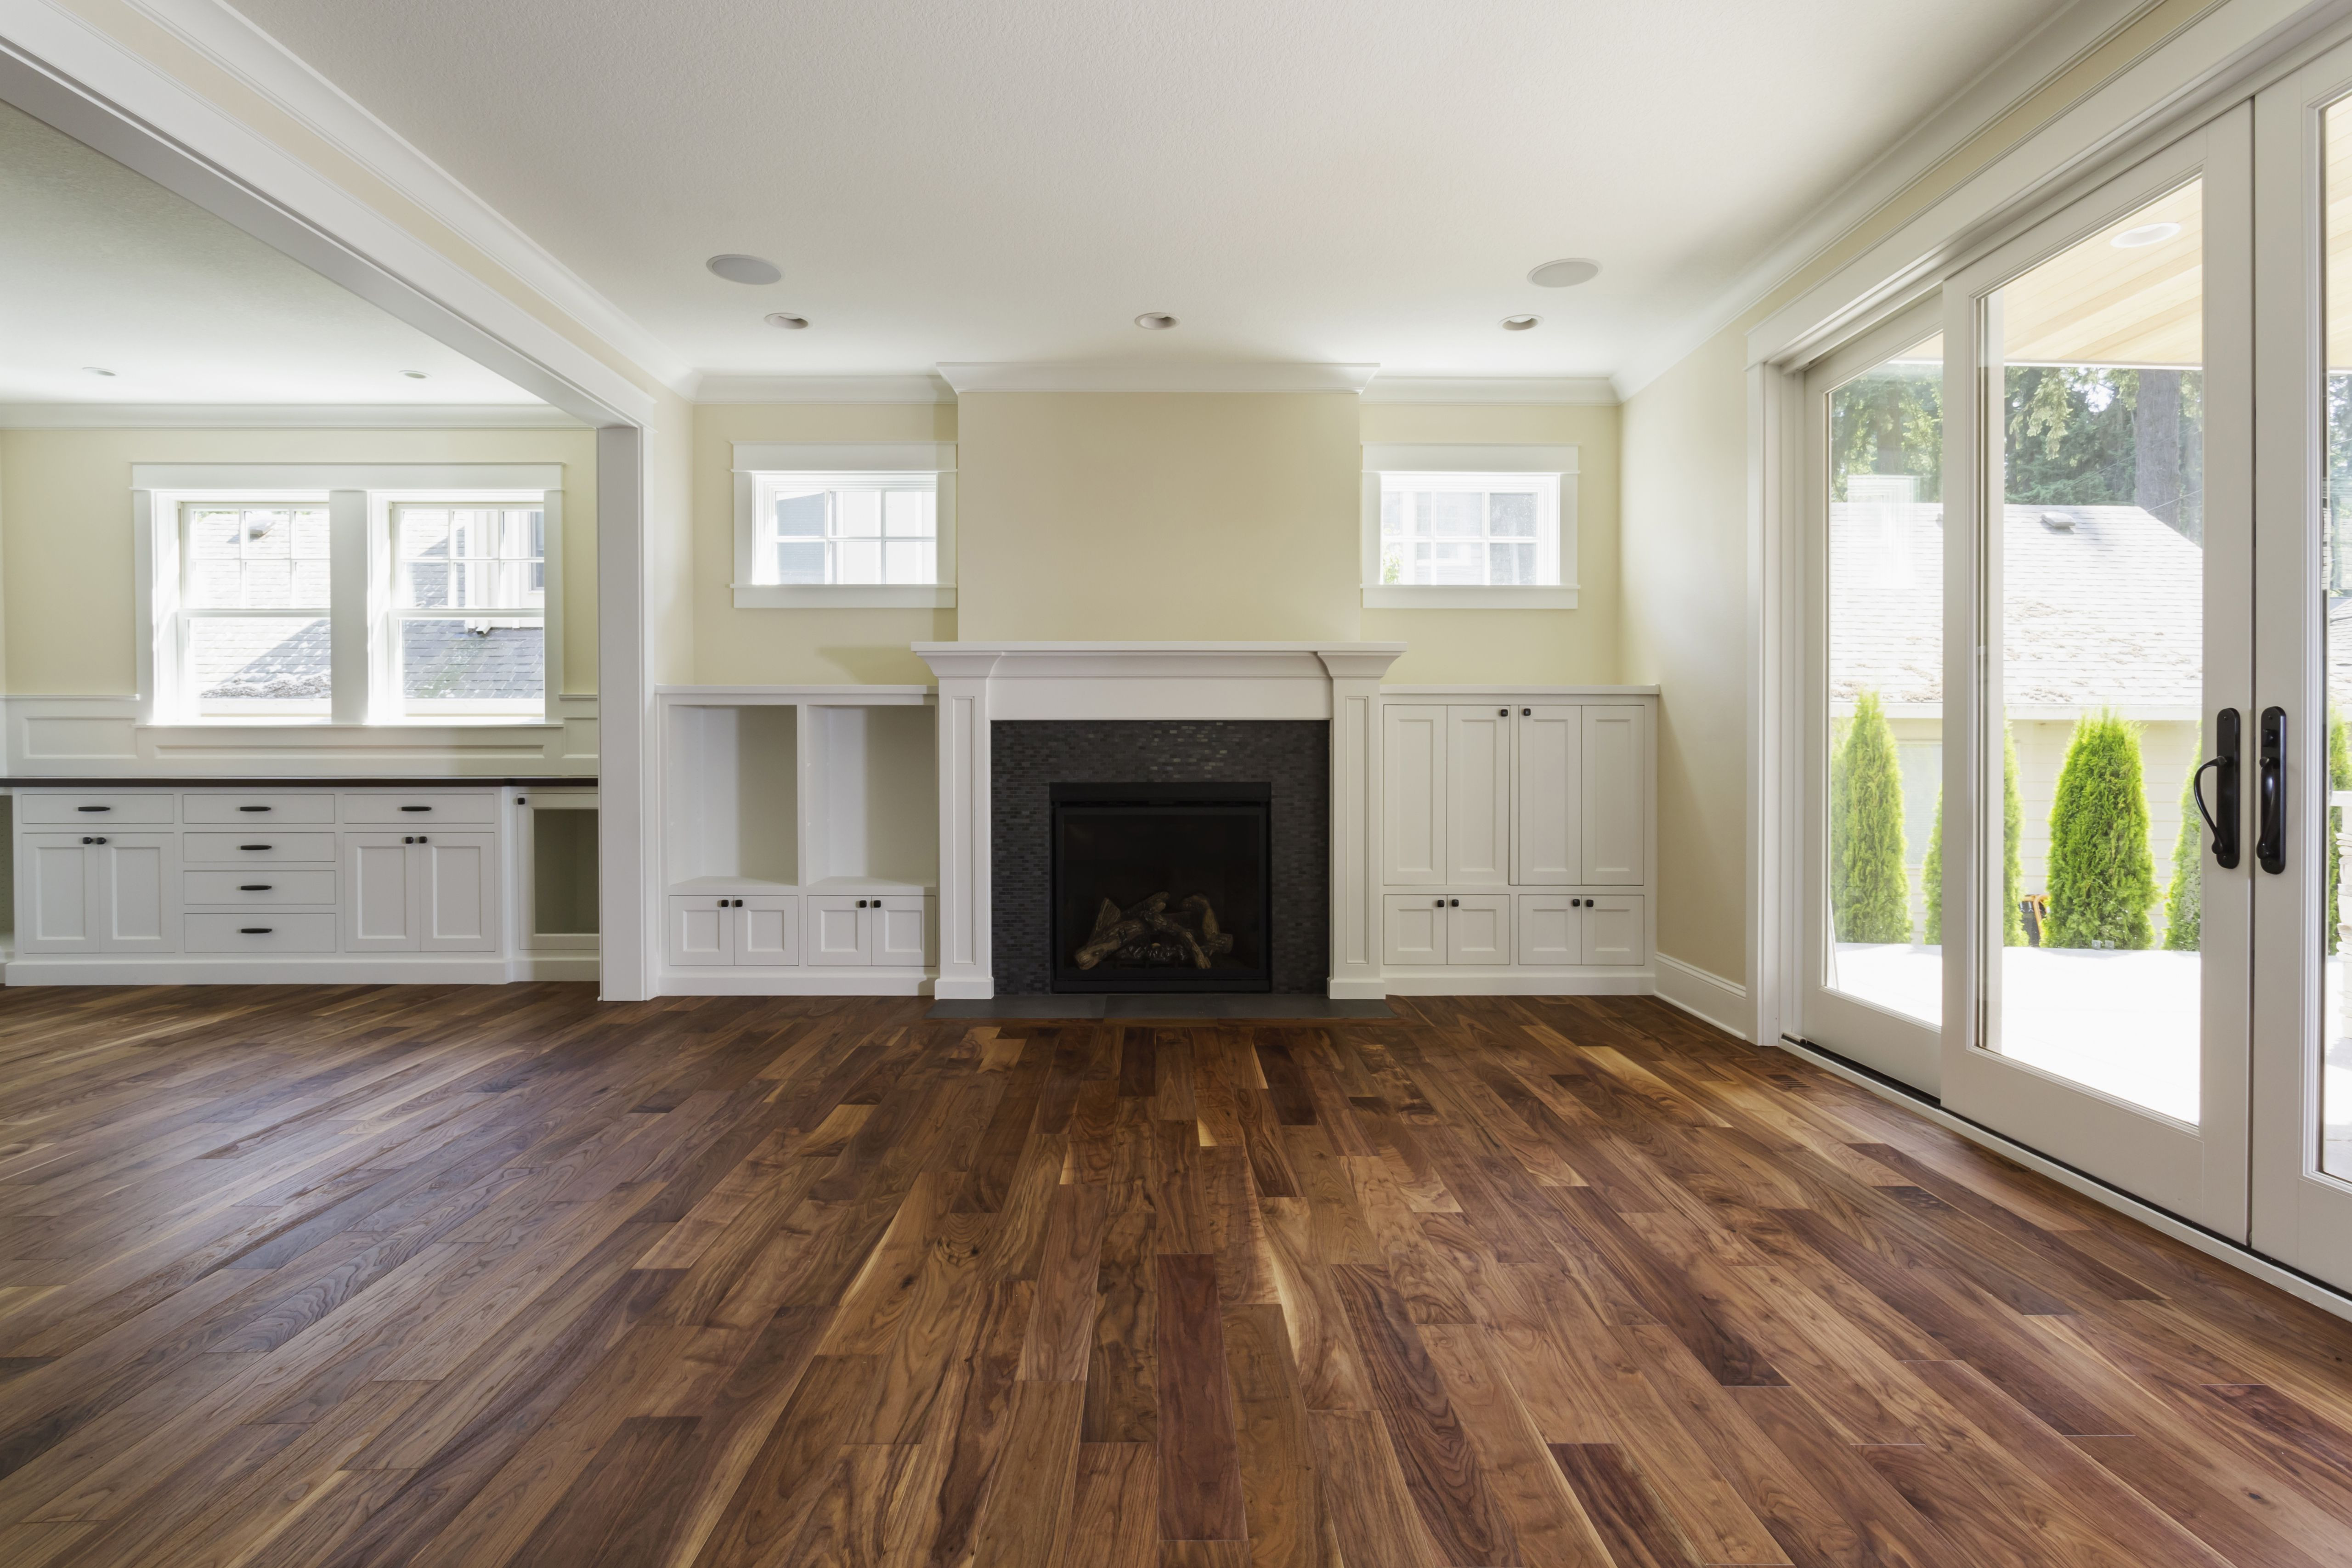 staining hardwood floors yourself of the pros and cons of prefinished hardwood flooring for fireplace and built in shelves in living room 482143011 57bef8e33df78cc16e035397